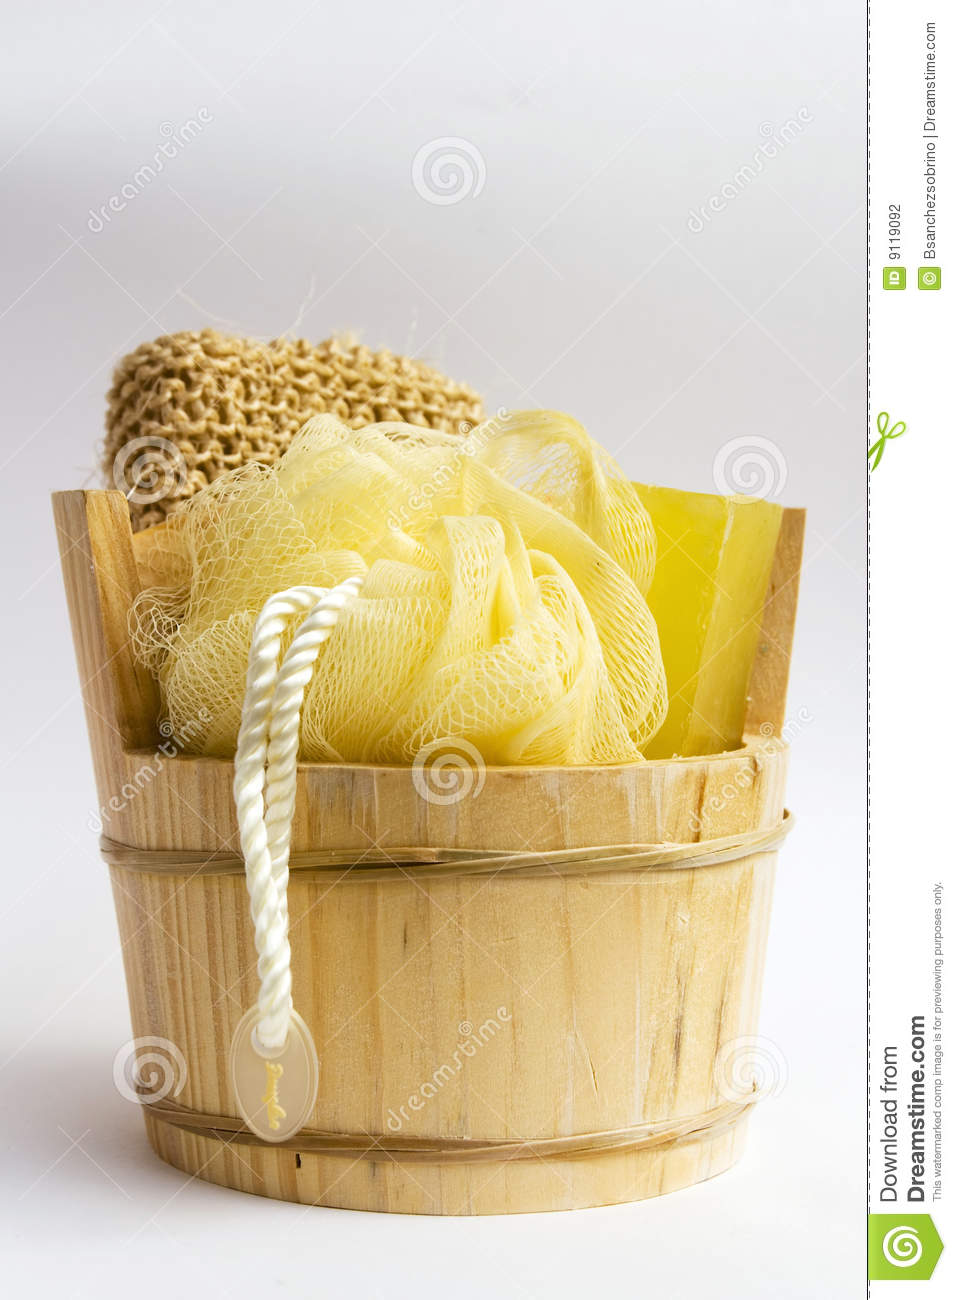 Personal Hygiene Items Stock Photography   Image  9119092